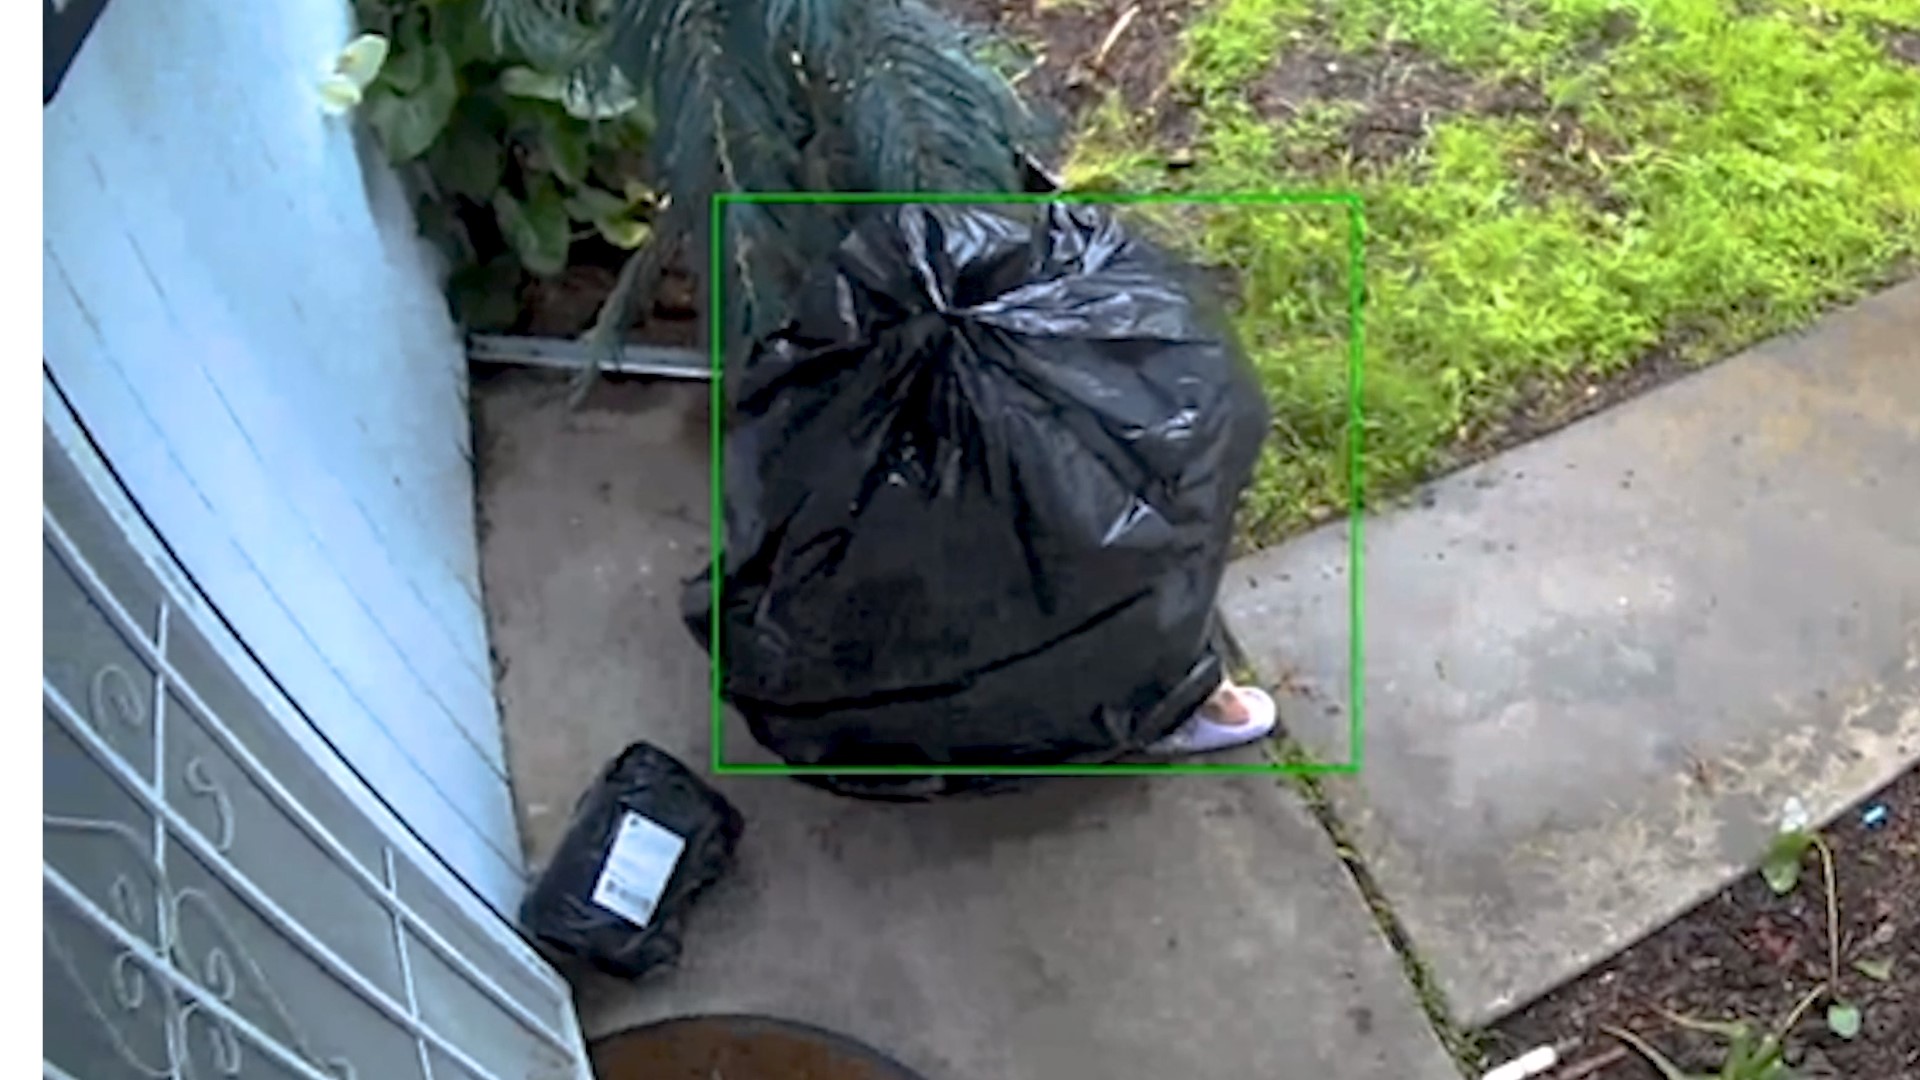 A person can be seen crouched inside a trash bag, slowly waddling to Omar Munoz's doorstep, picking up a small package and waddling away.